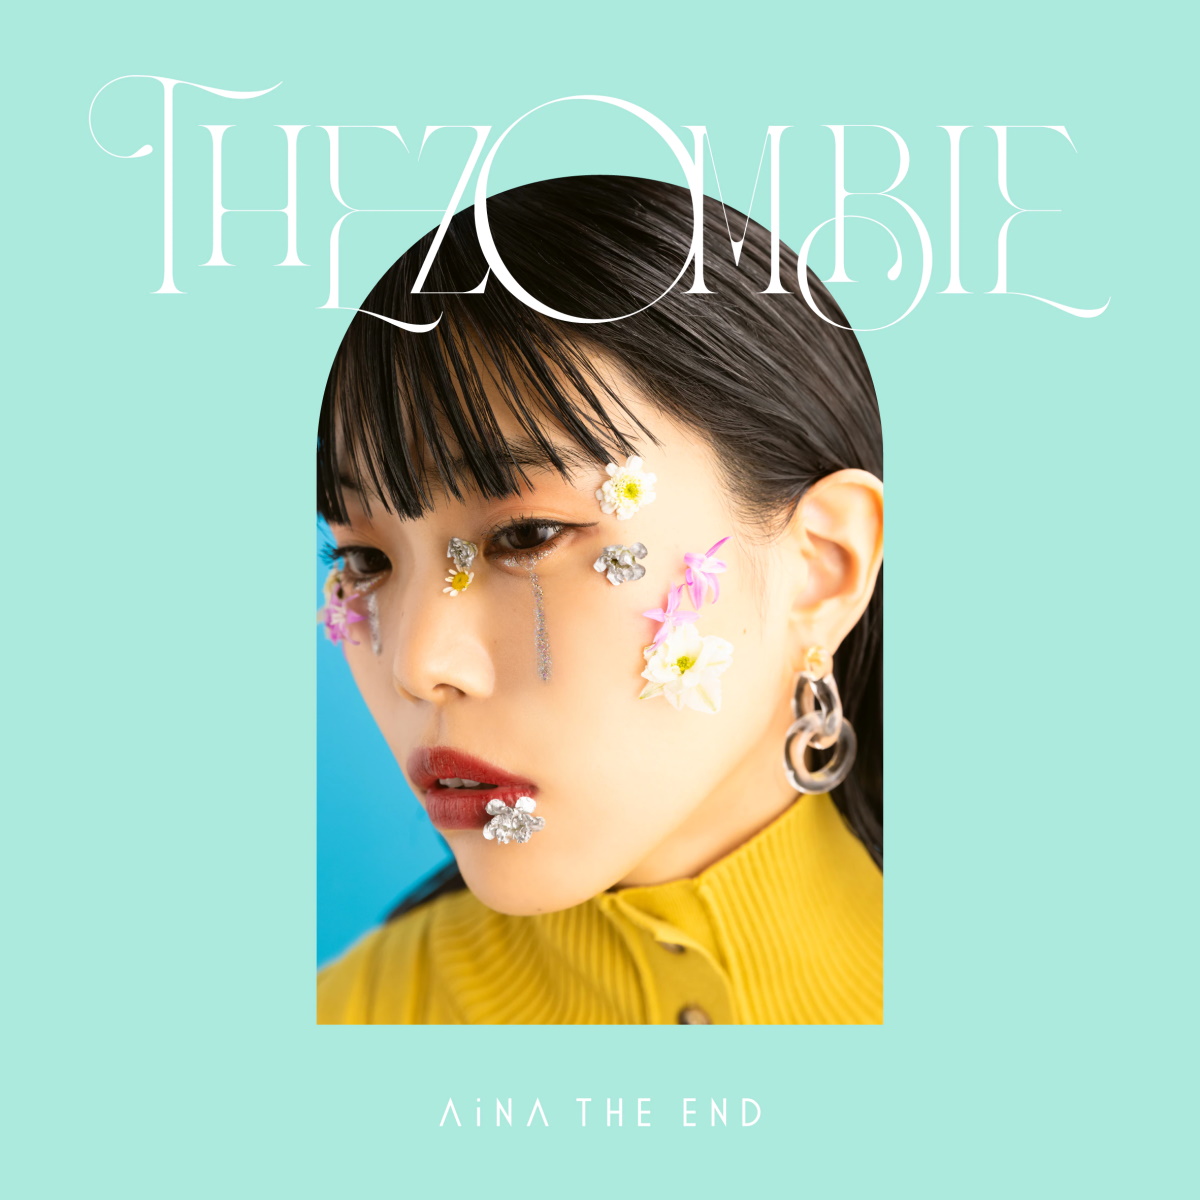 Cover for『AiNA THE END - kamisama』from the release『THE ZOMBIE』